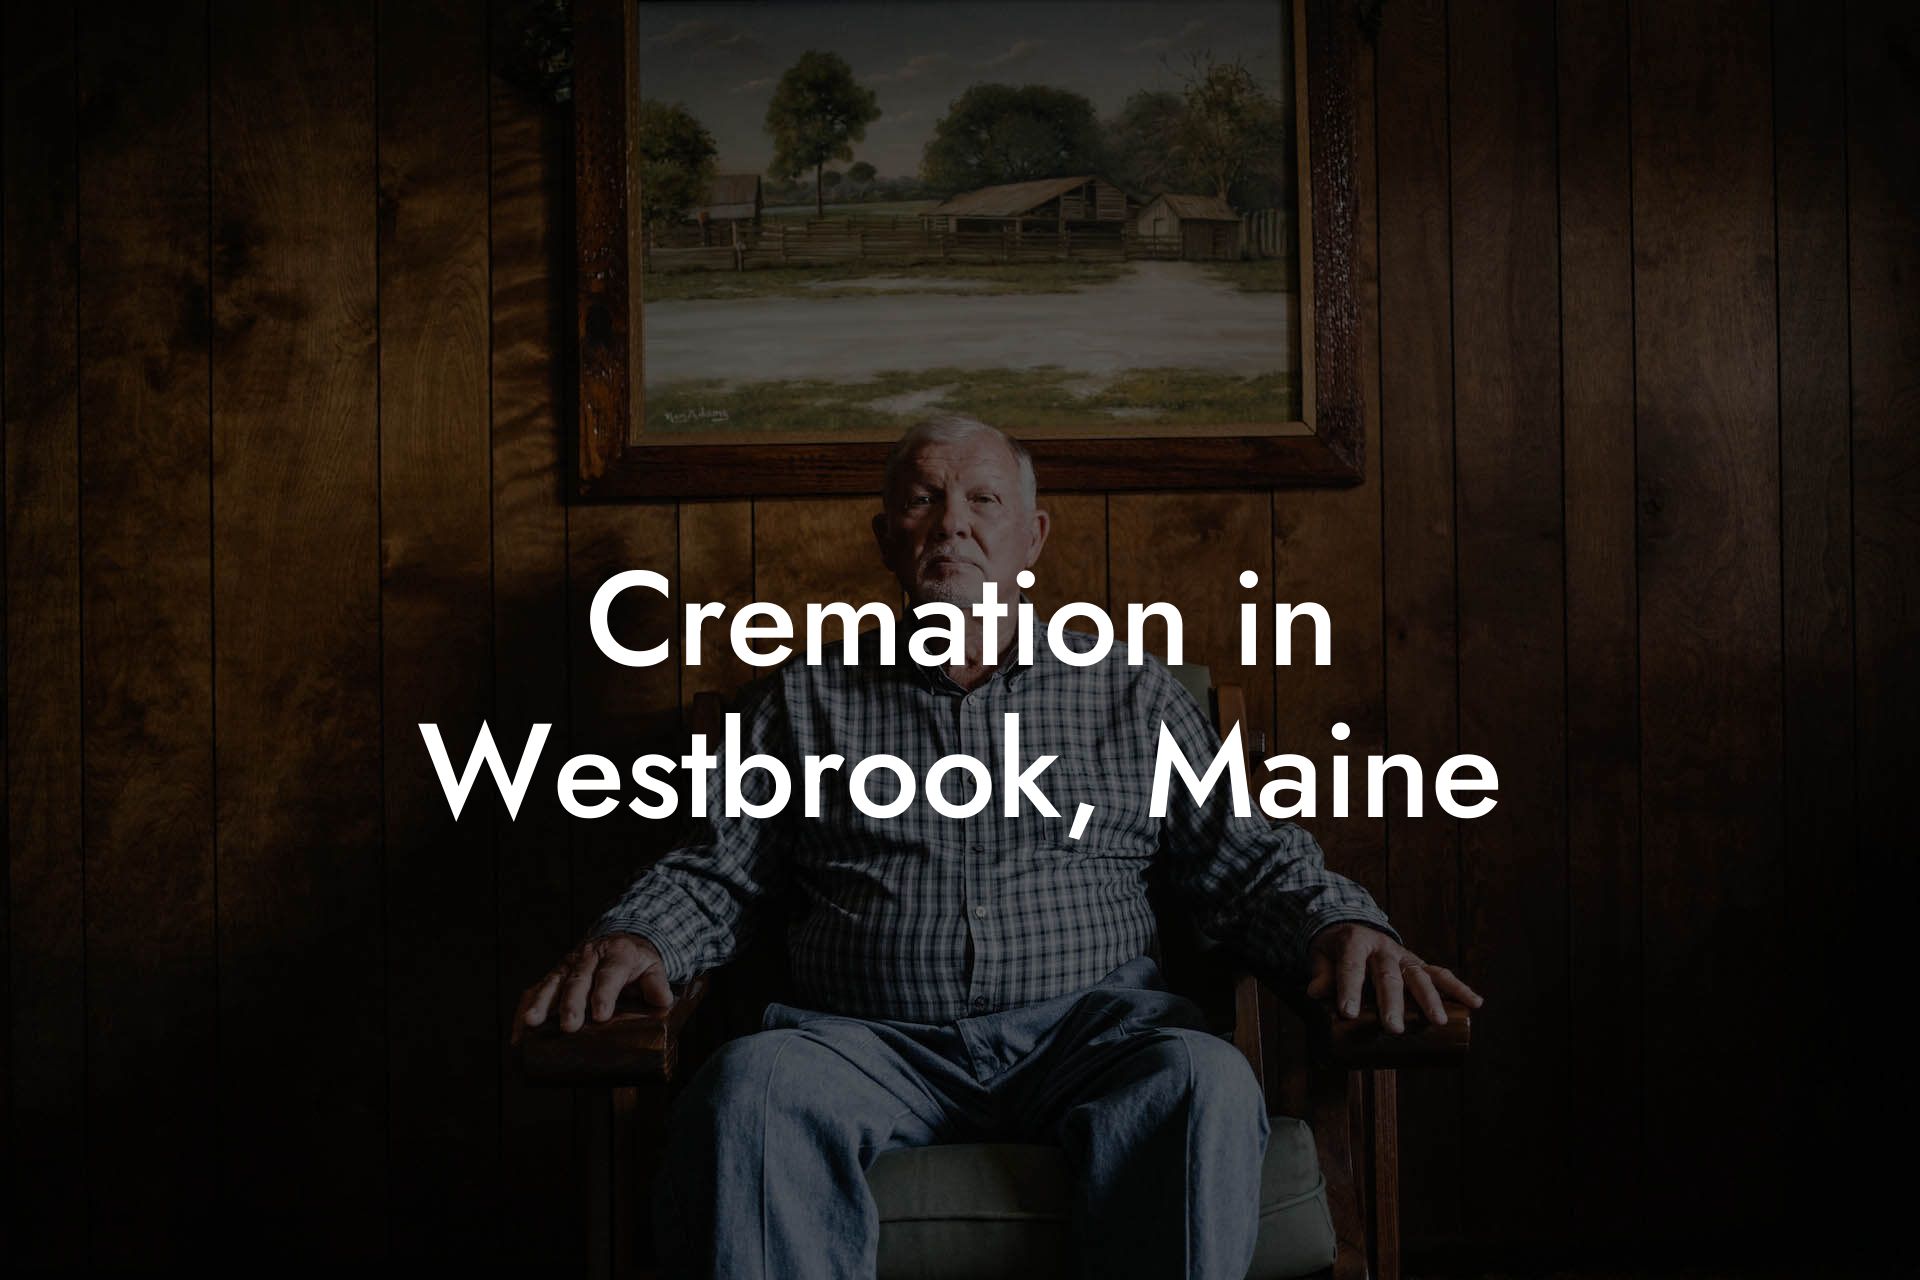 Cremation in Westbrook, Maine